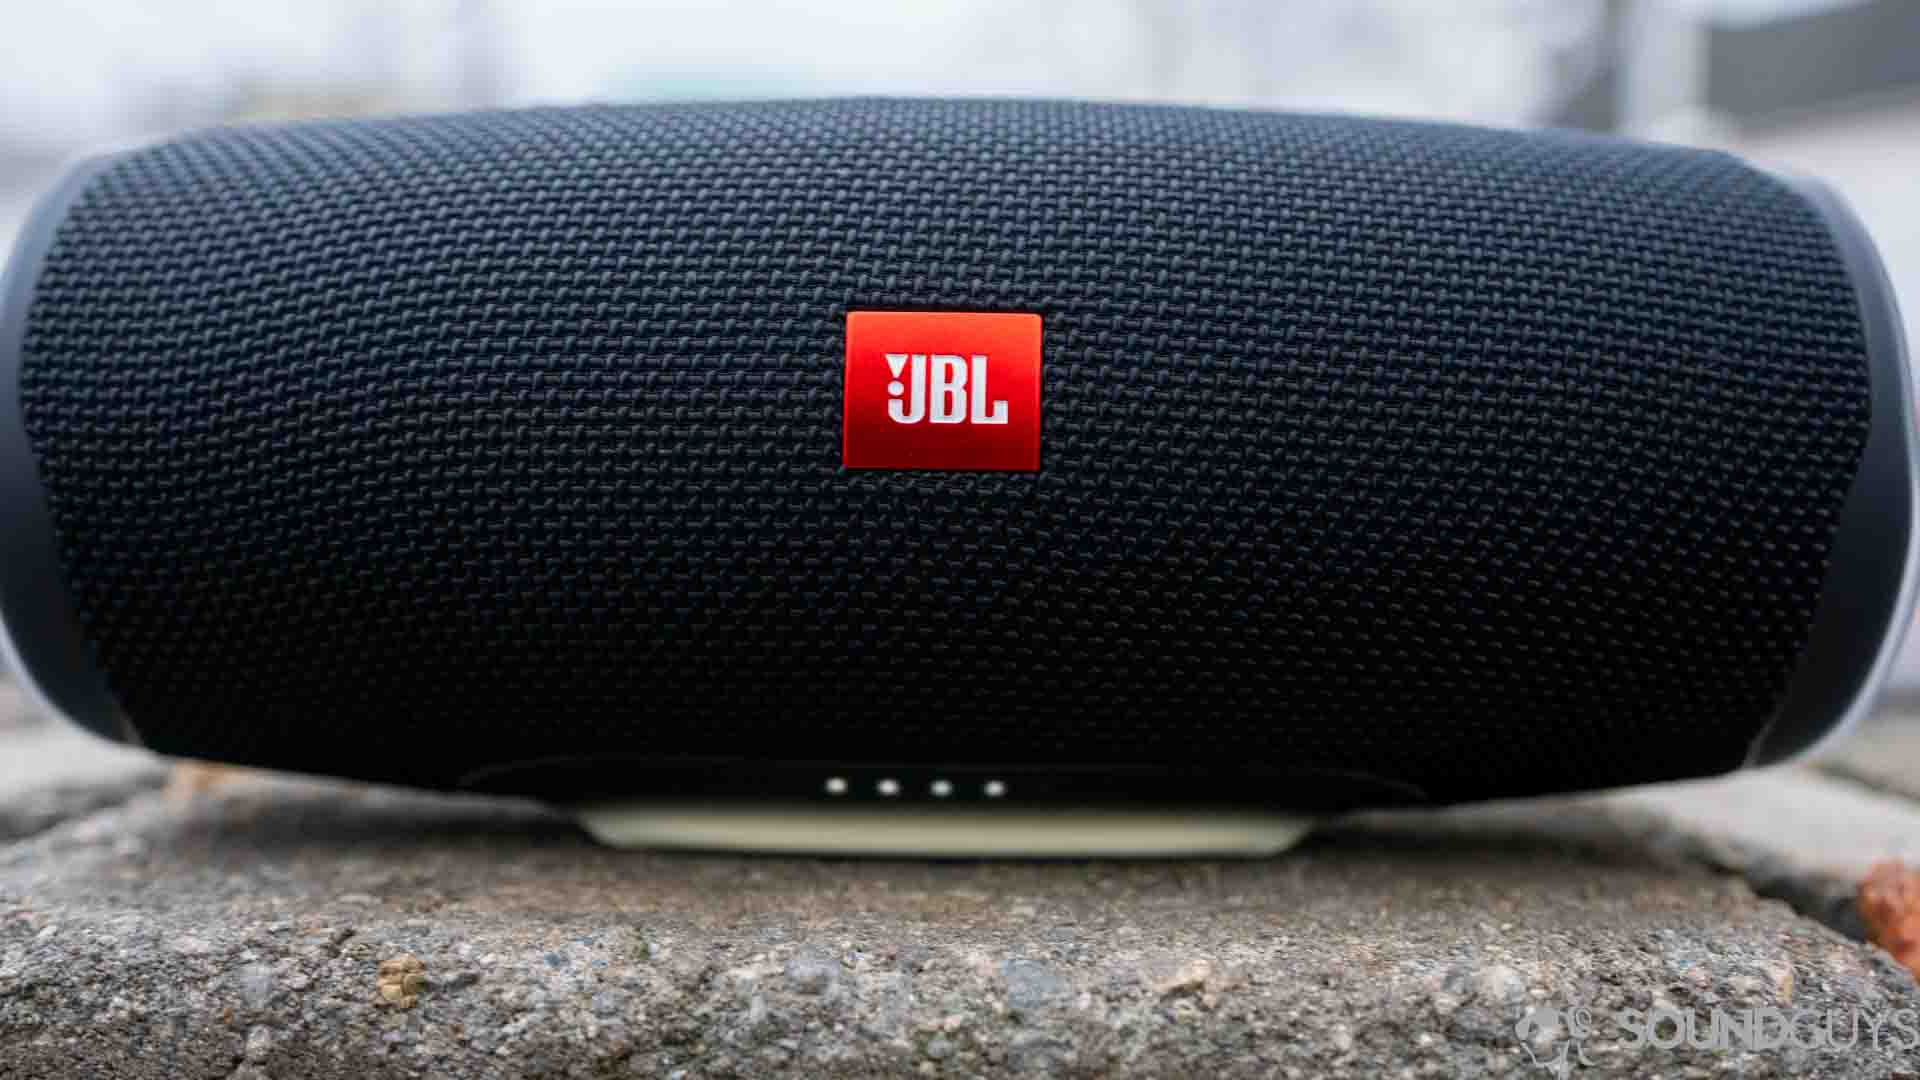 JBL Charge 4 review: JBL Charge 4 Bluetooth speaker gets some key upgrades  - CNET